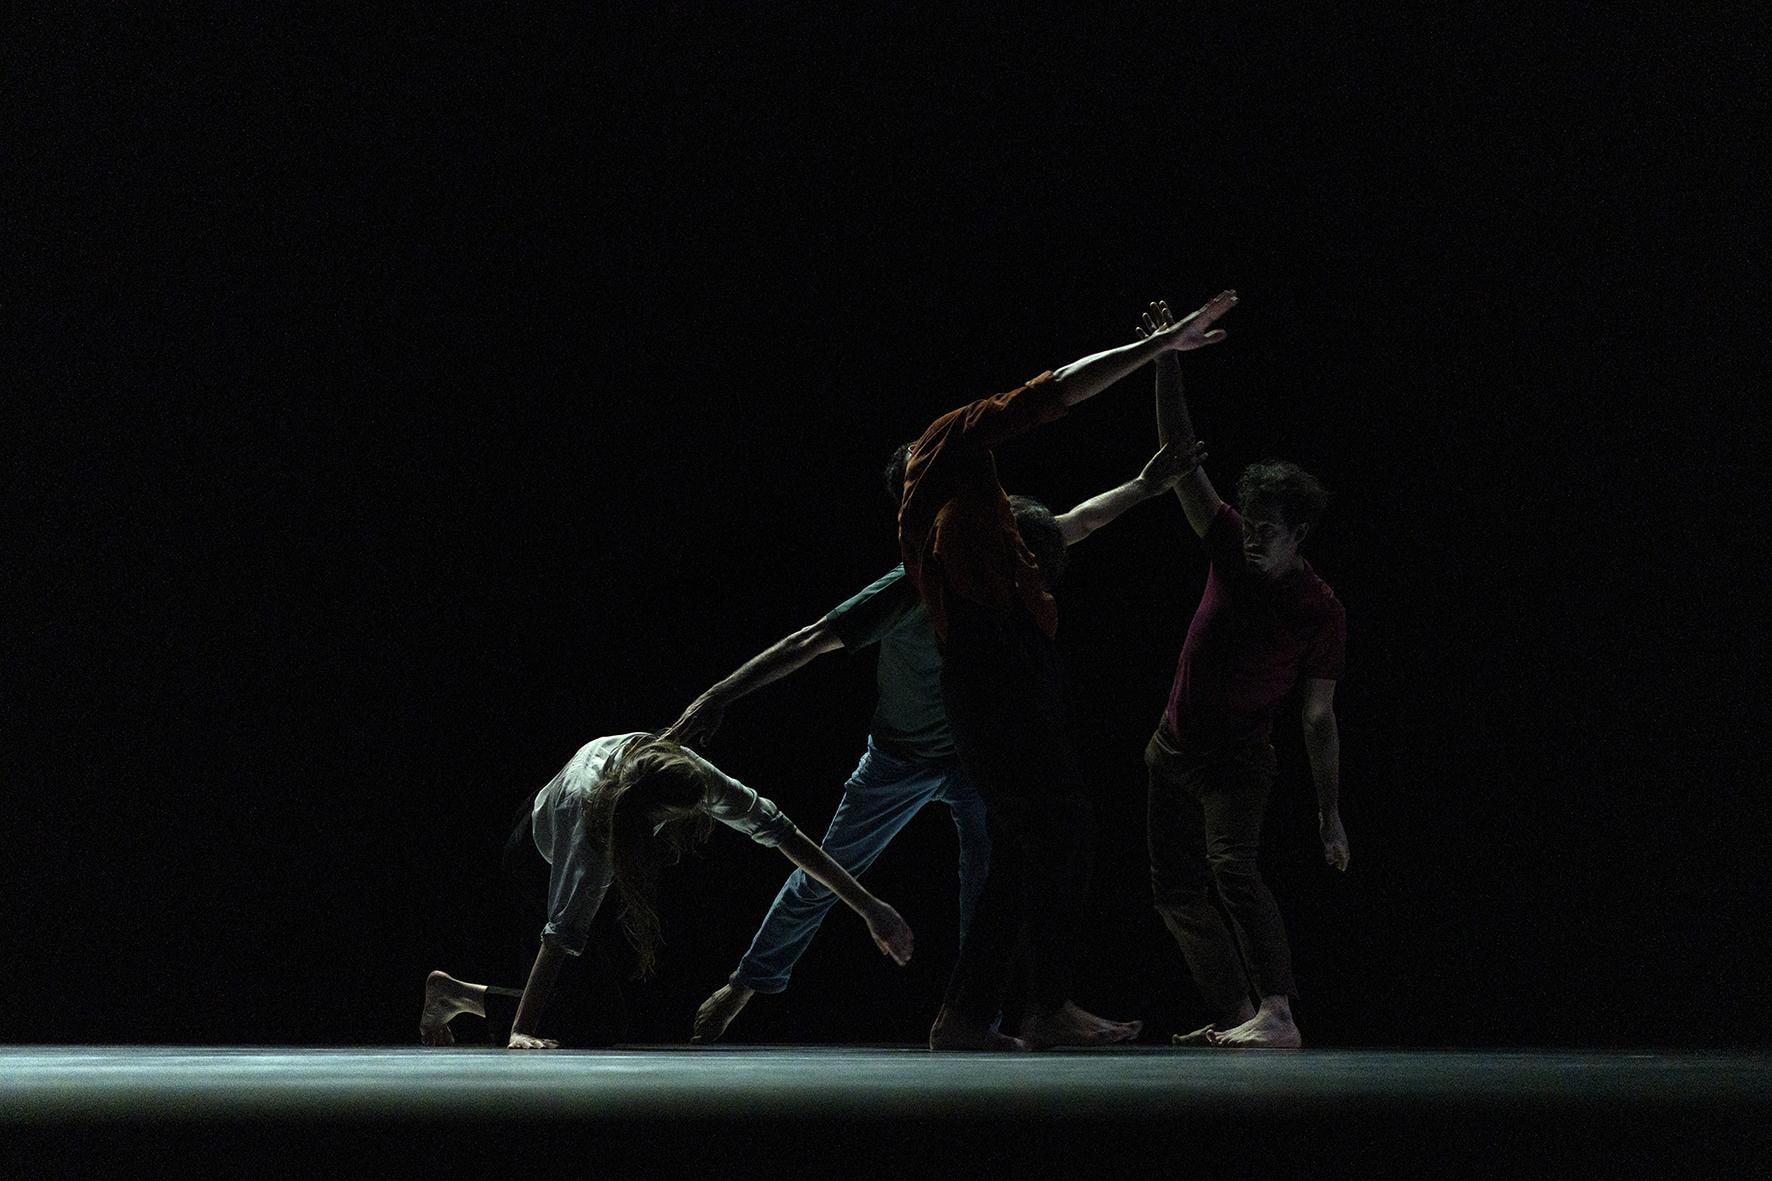 Dancers creating a form on a dark stage